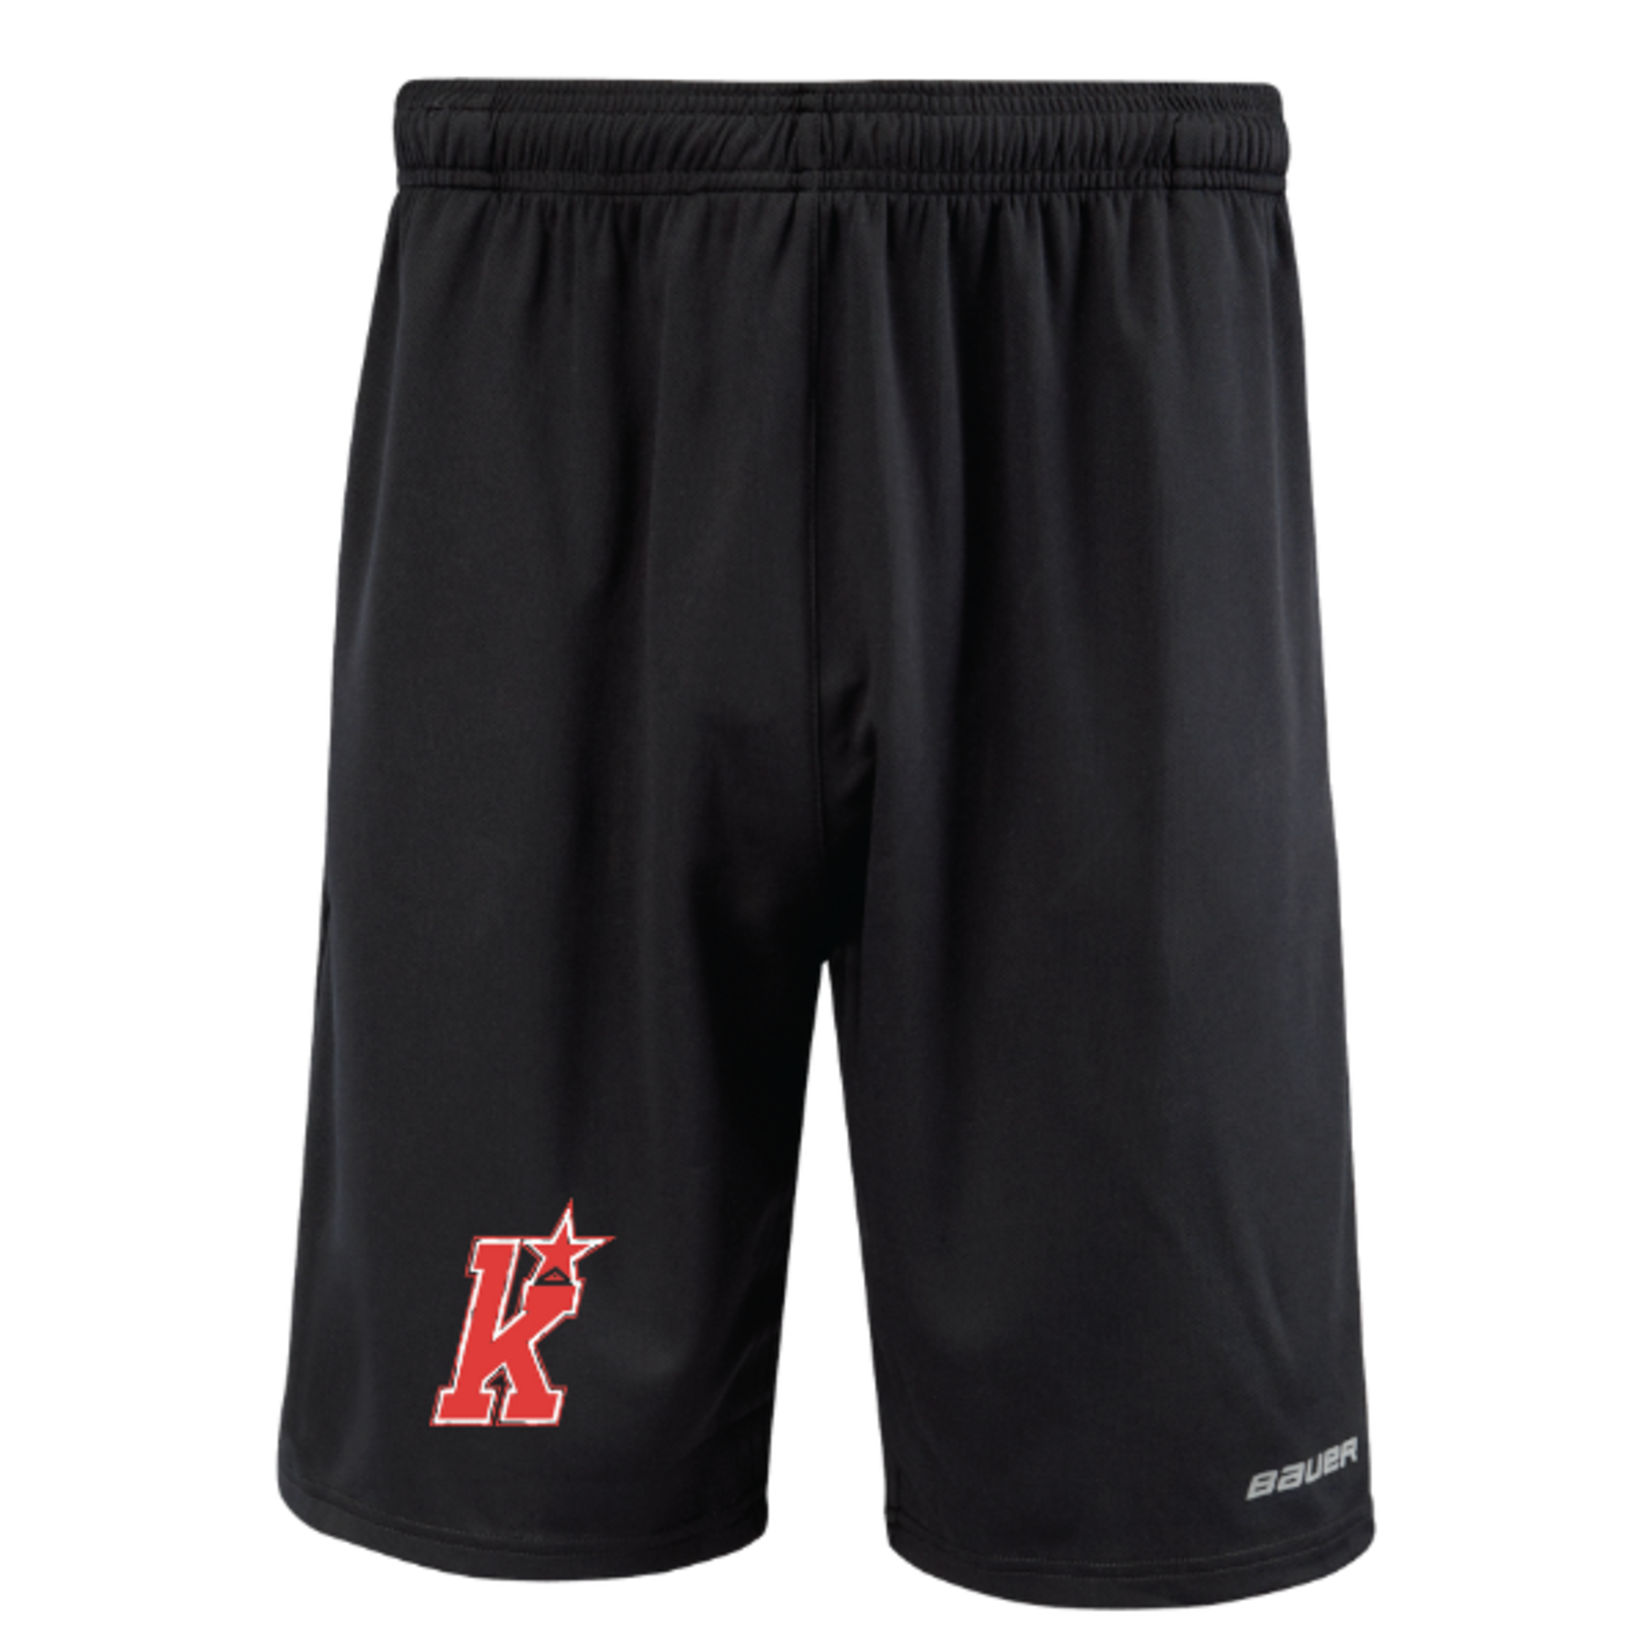 Bauer Kirkwood Bauer Core Short (YOUTH)